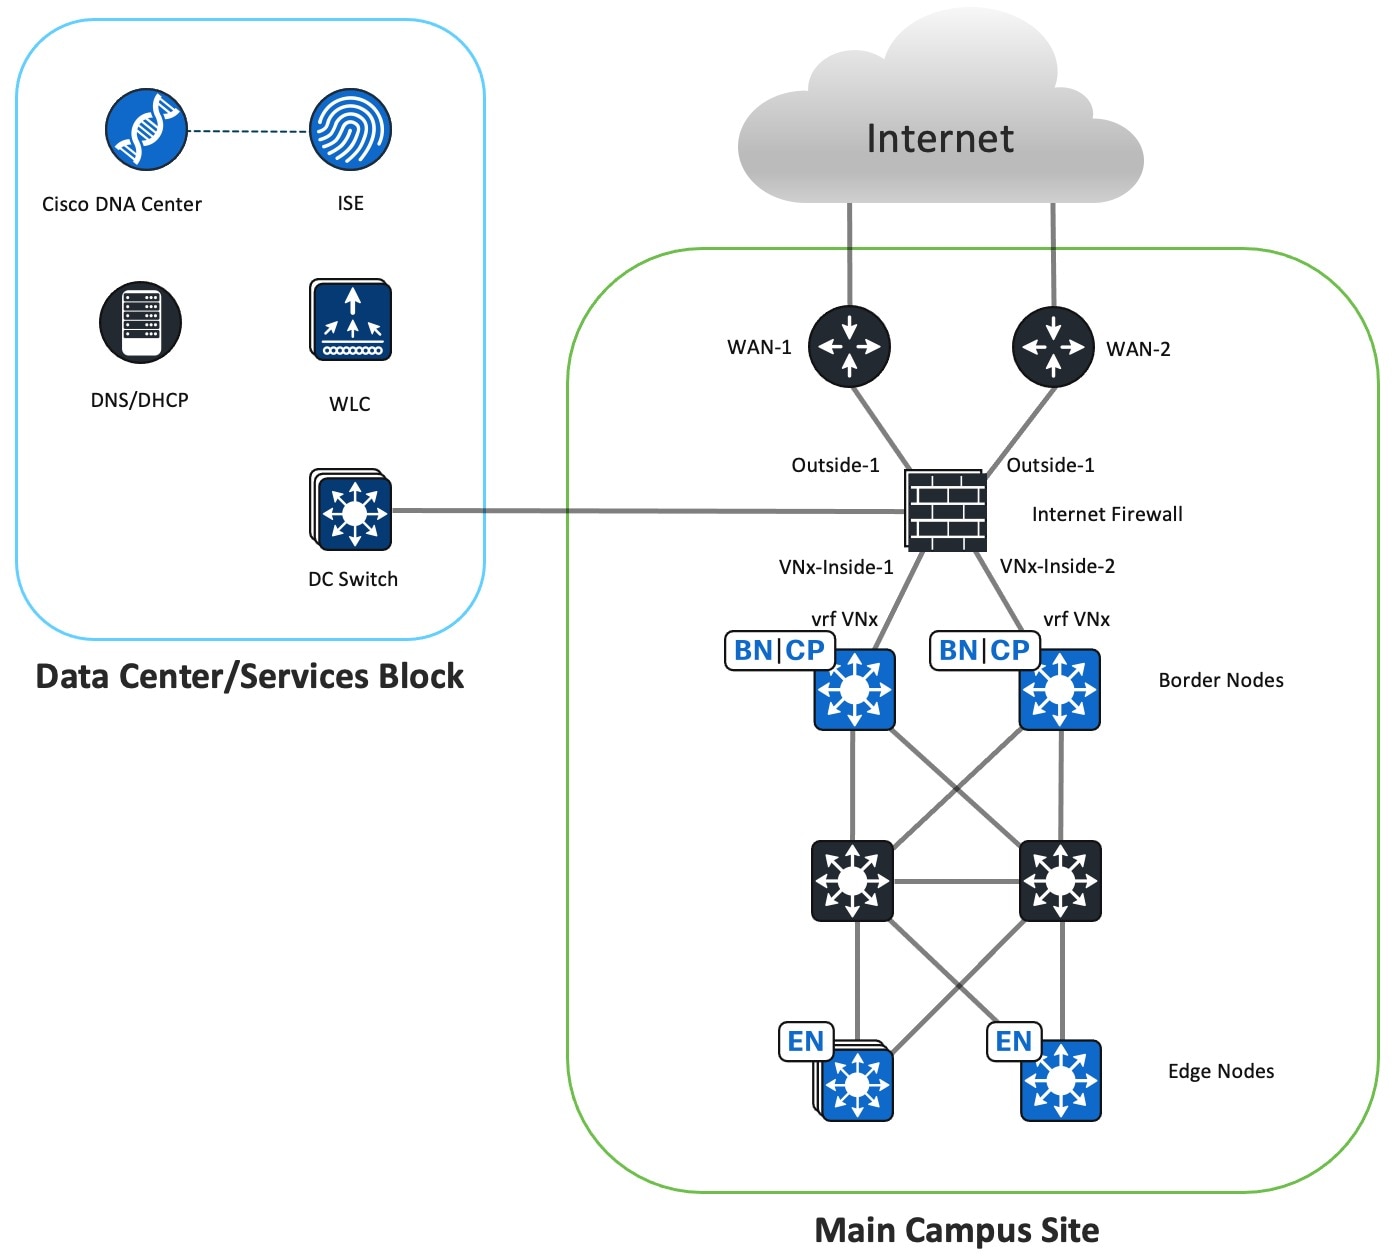 The Internet Firewall Instance topology displays the Internet Firewall located in the main campus site. This firewall connects to the data center and the internet with inside and outside interfaces.